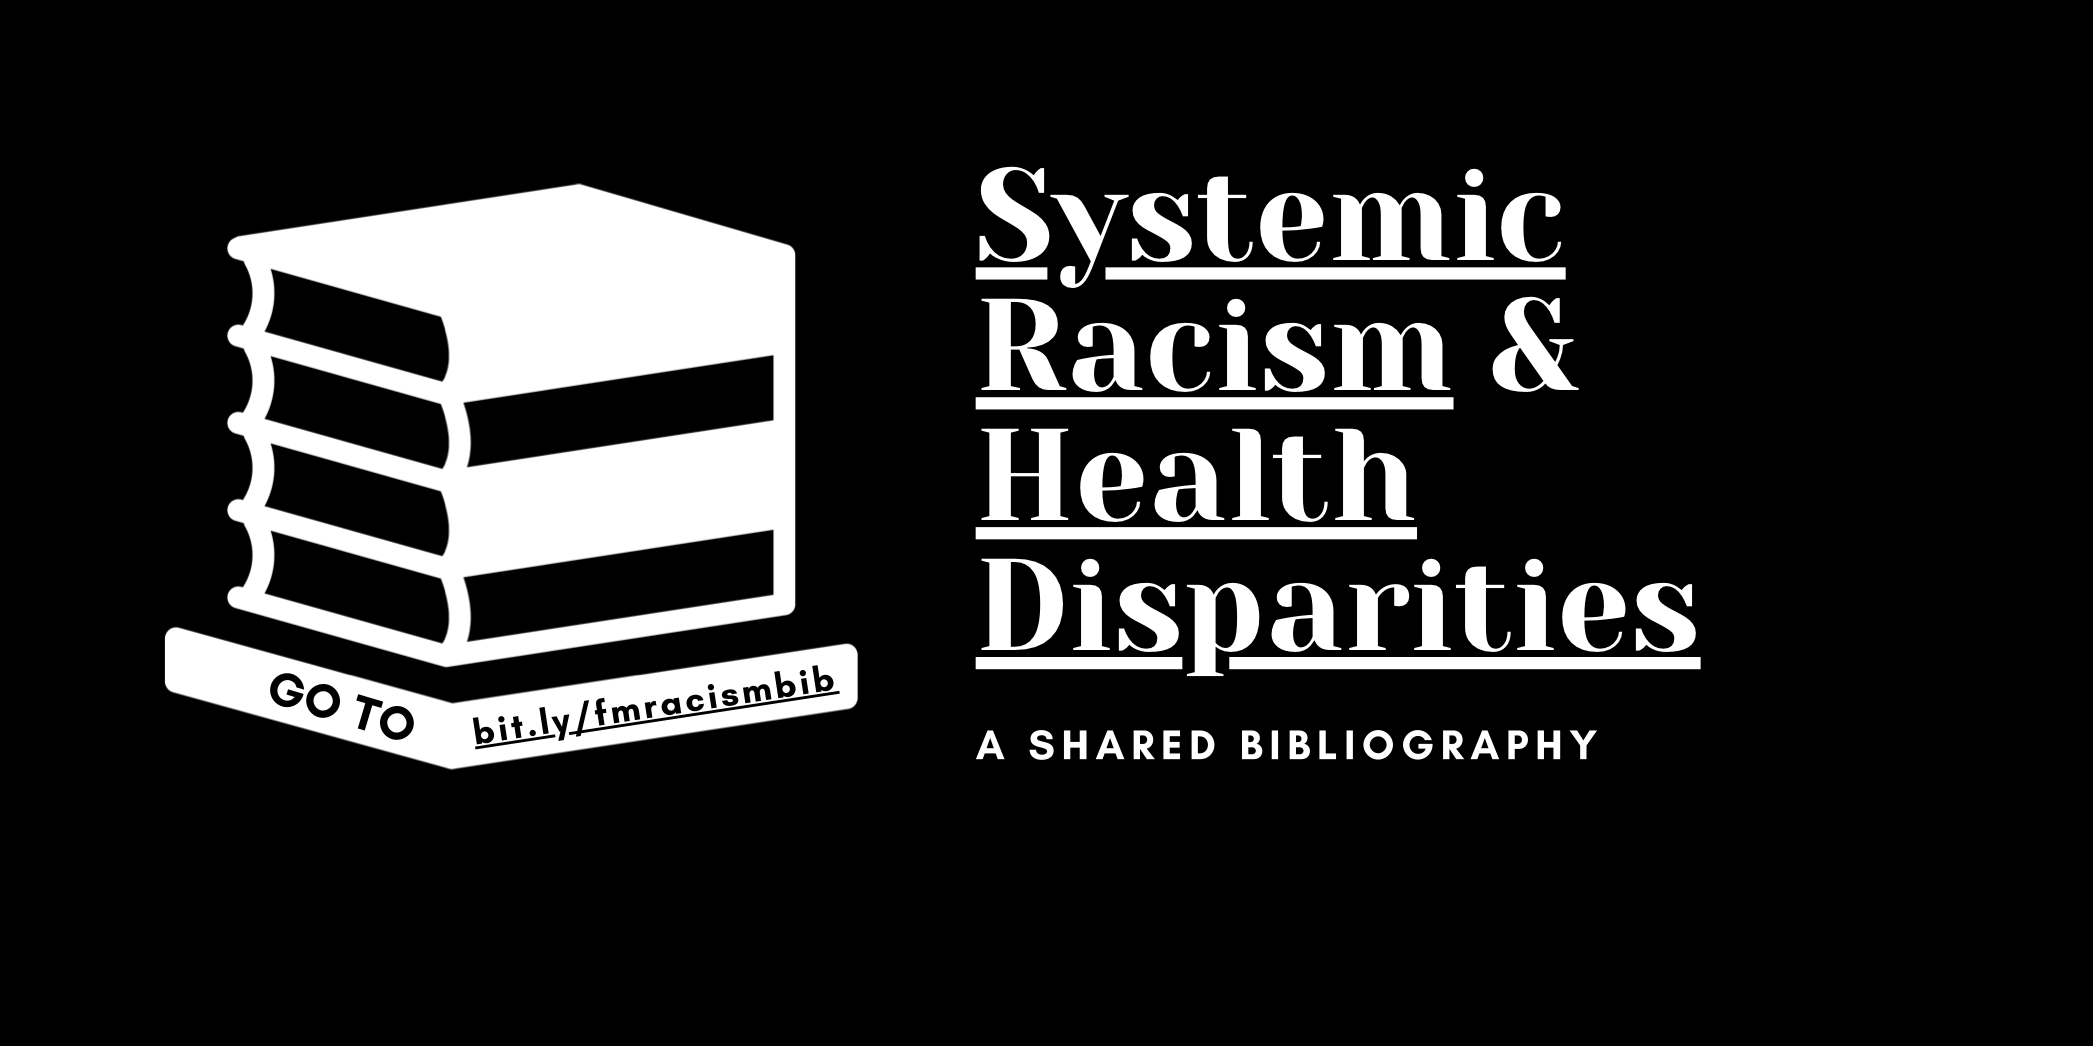 Systemic racism and health disparities a shared bibliography go to bit.ly/fmracismbib